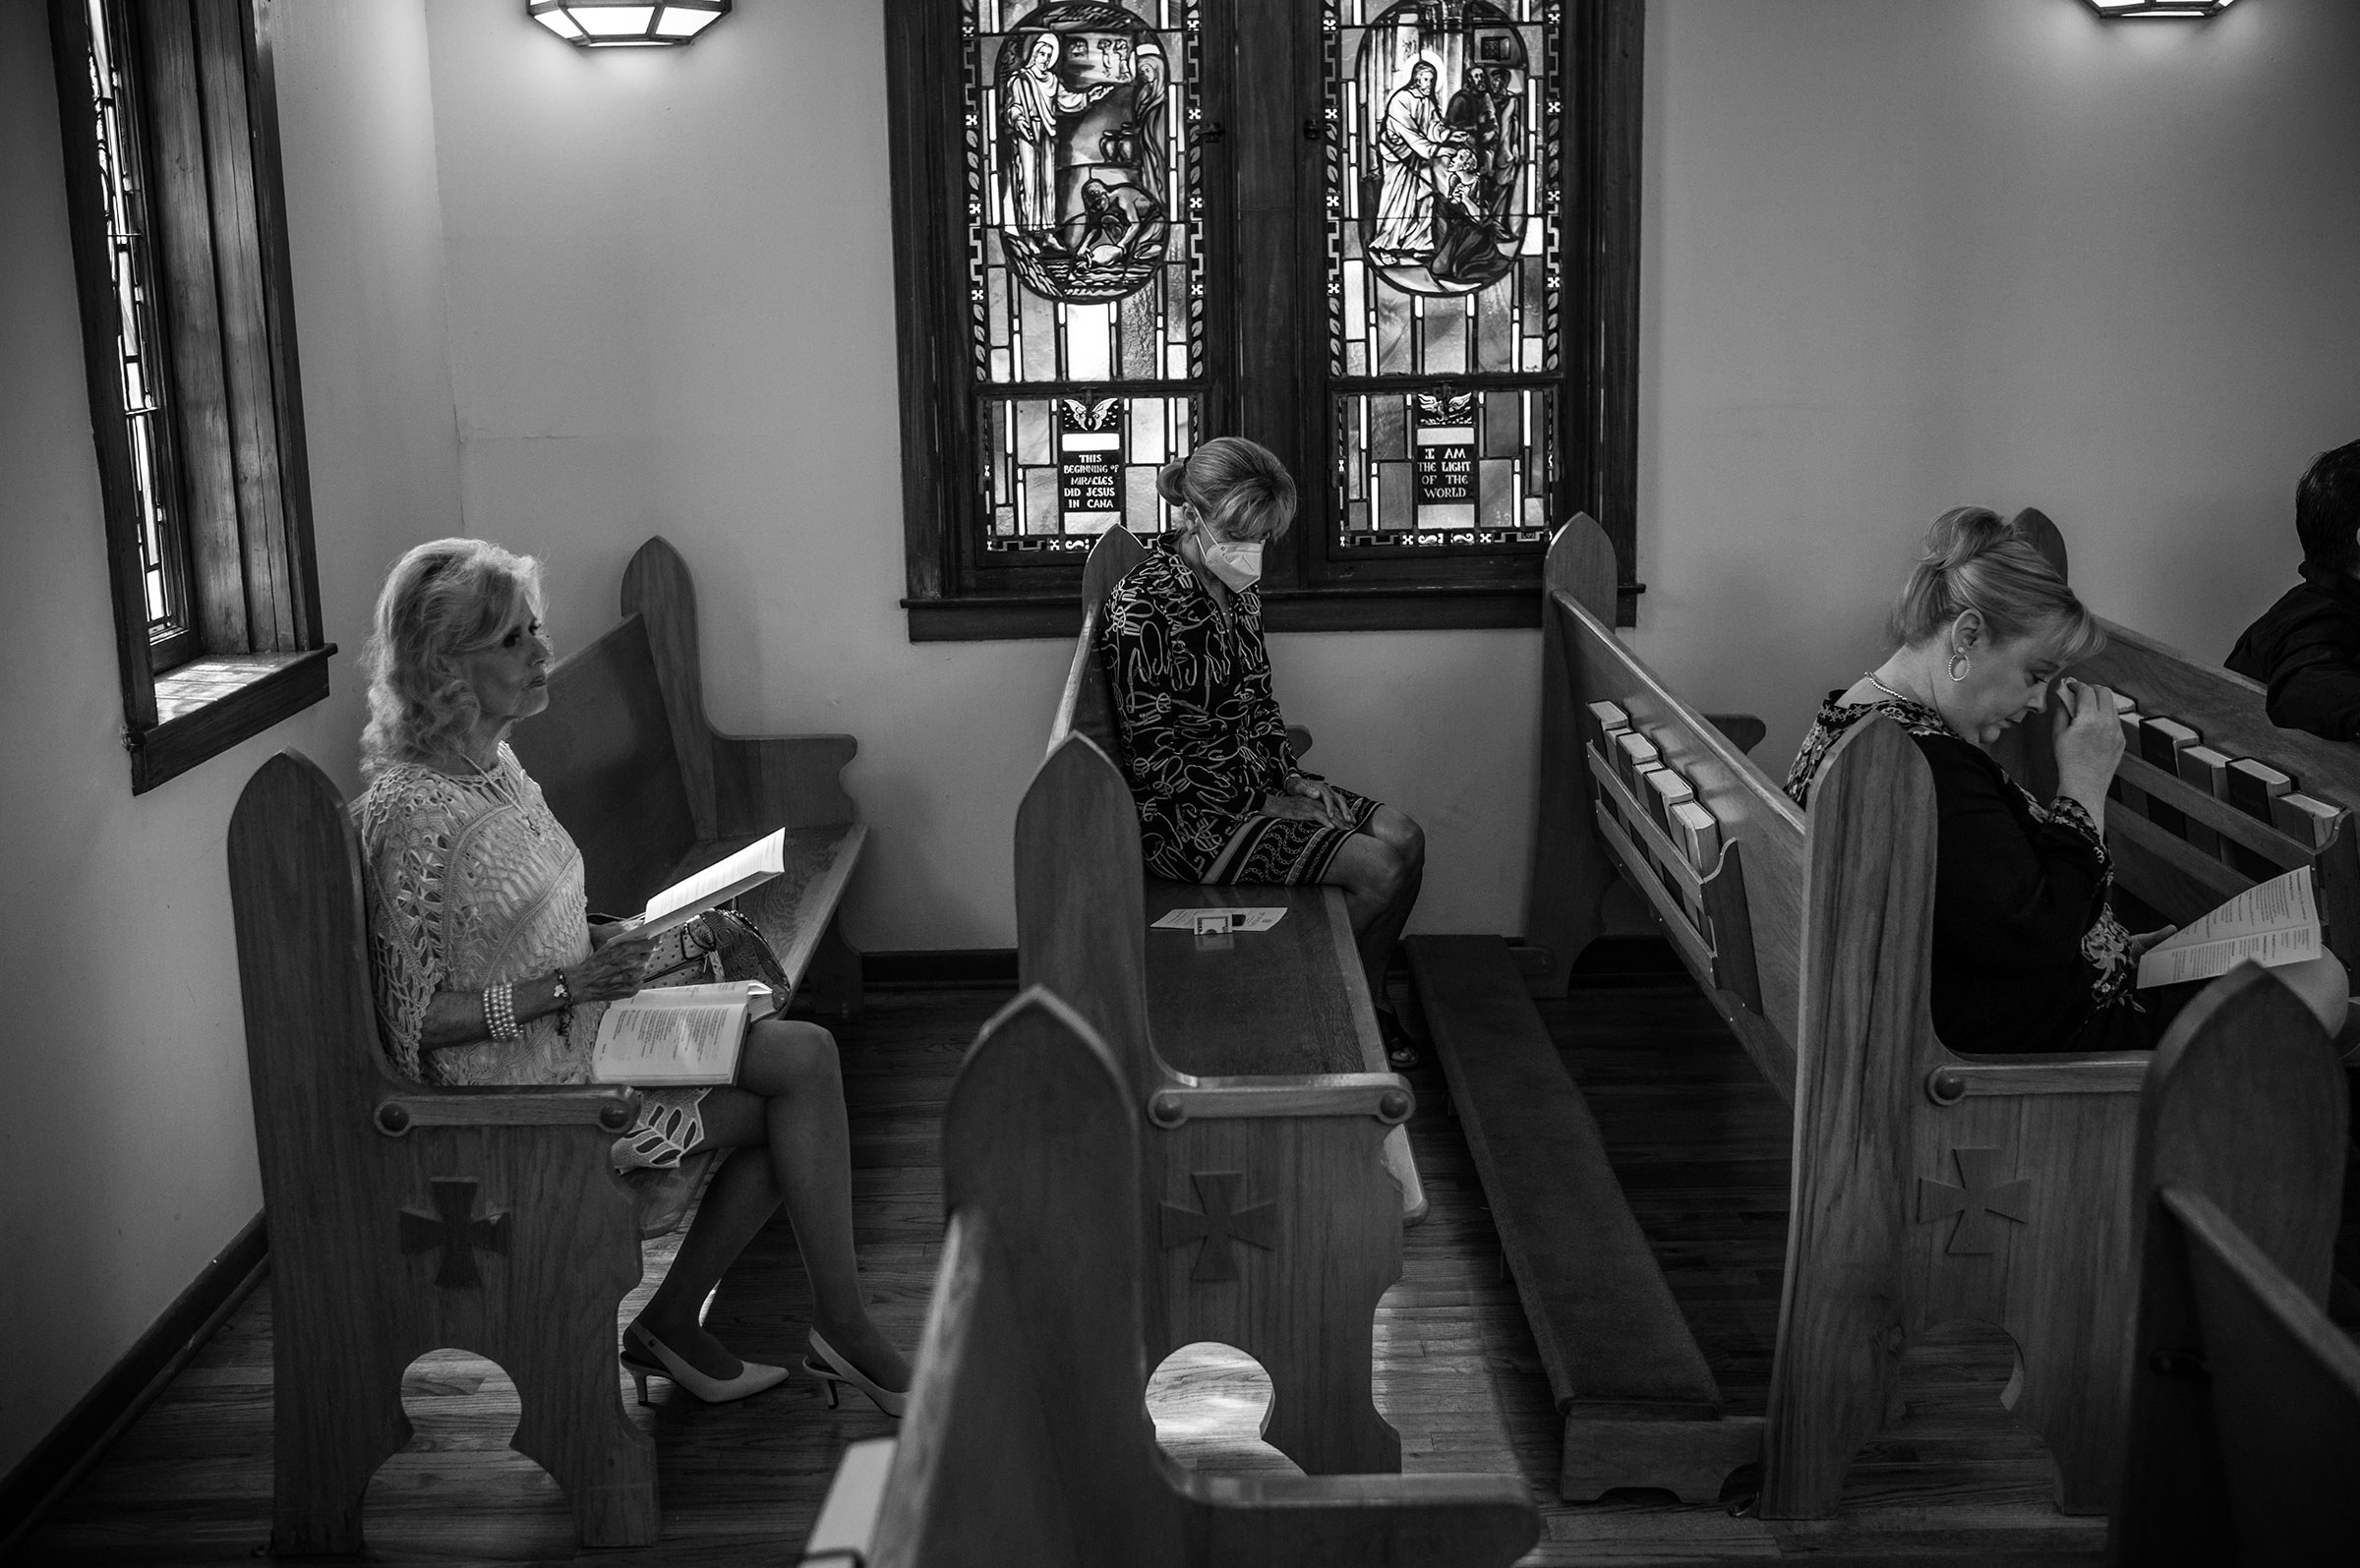 Three woman listen to a sermon at St. Philip's Episcopal Church on May 29, 2022. (David Butow for TIME)